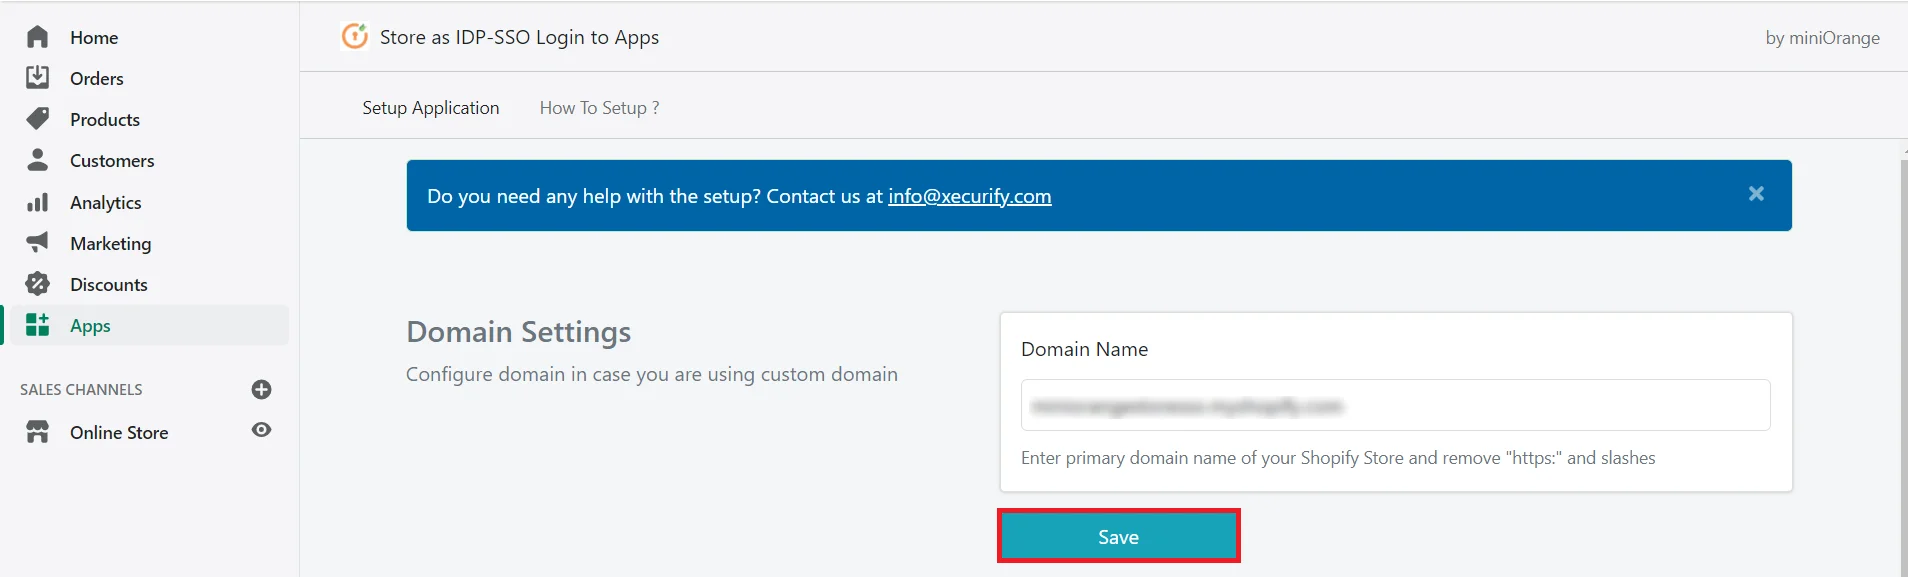 Shopify Single Sign-On (SSO)- add domain